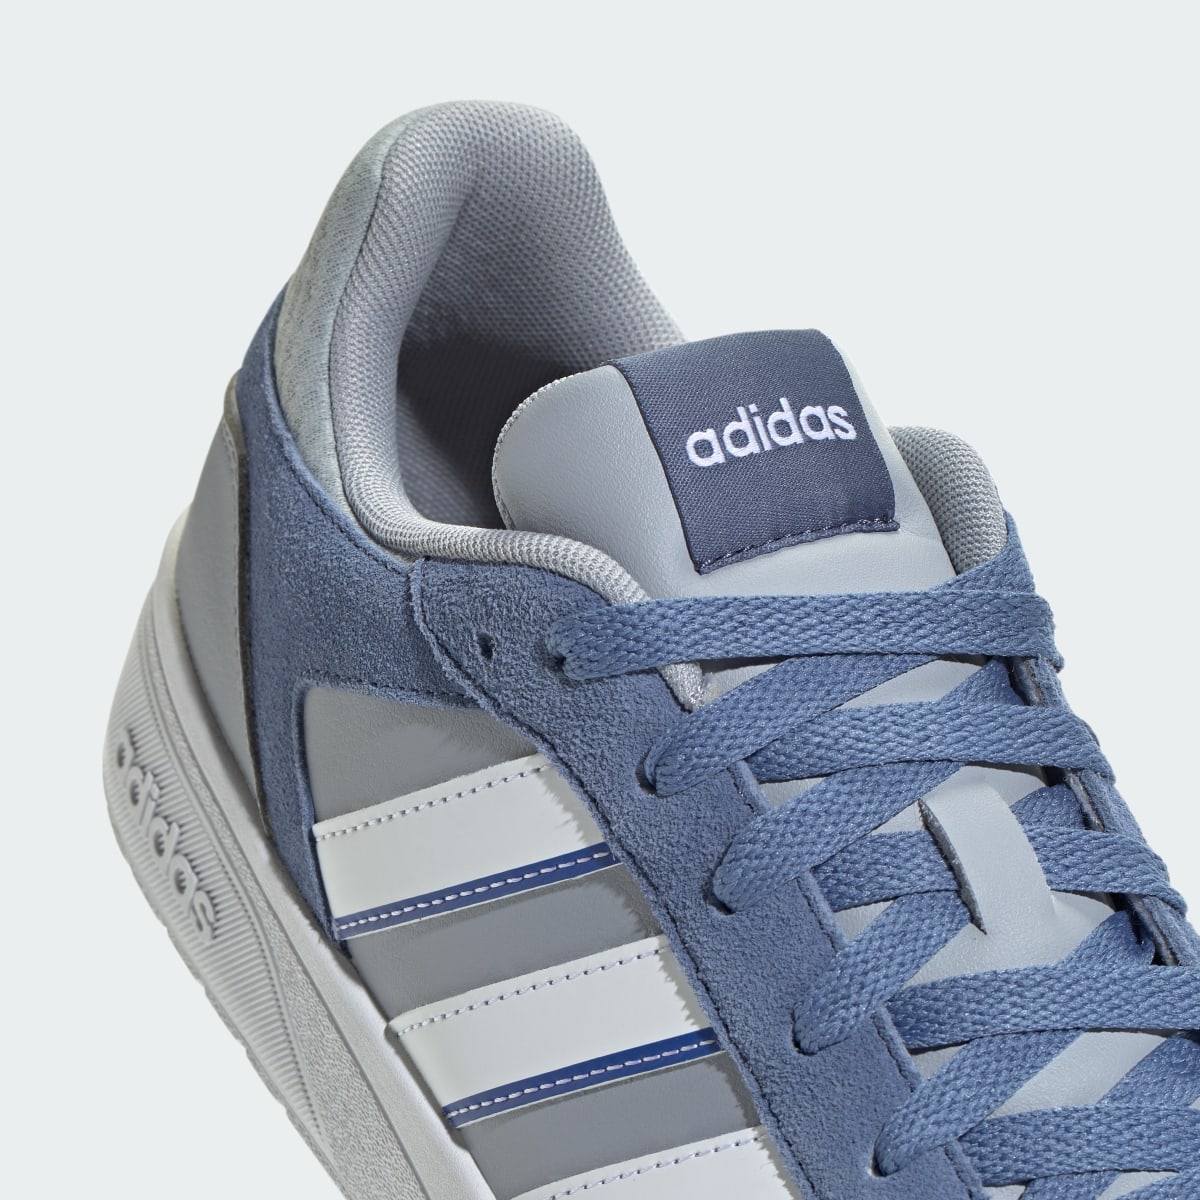 Adidas Courtbeat Shoes. 10